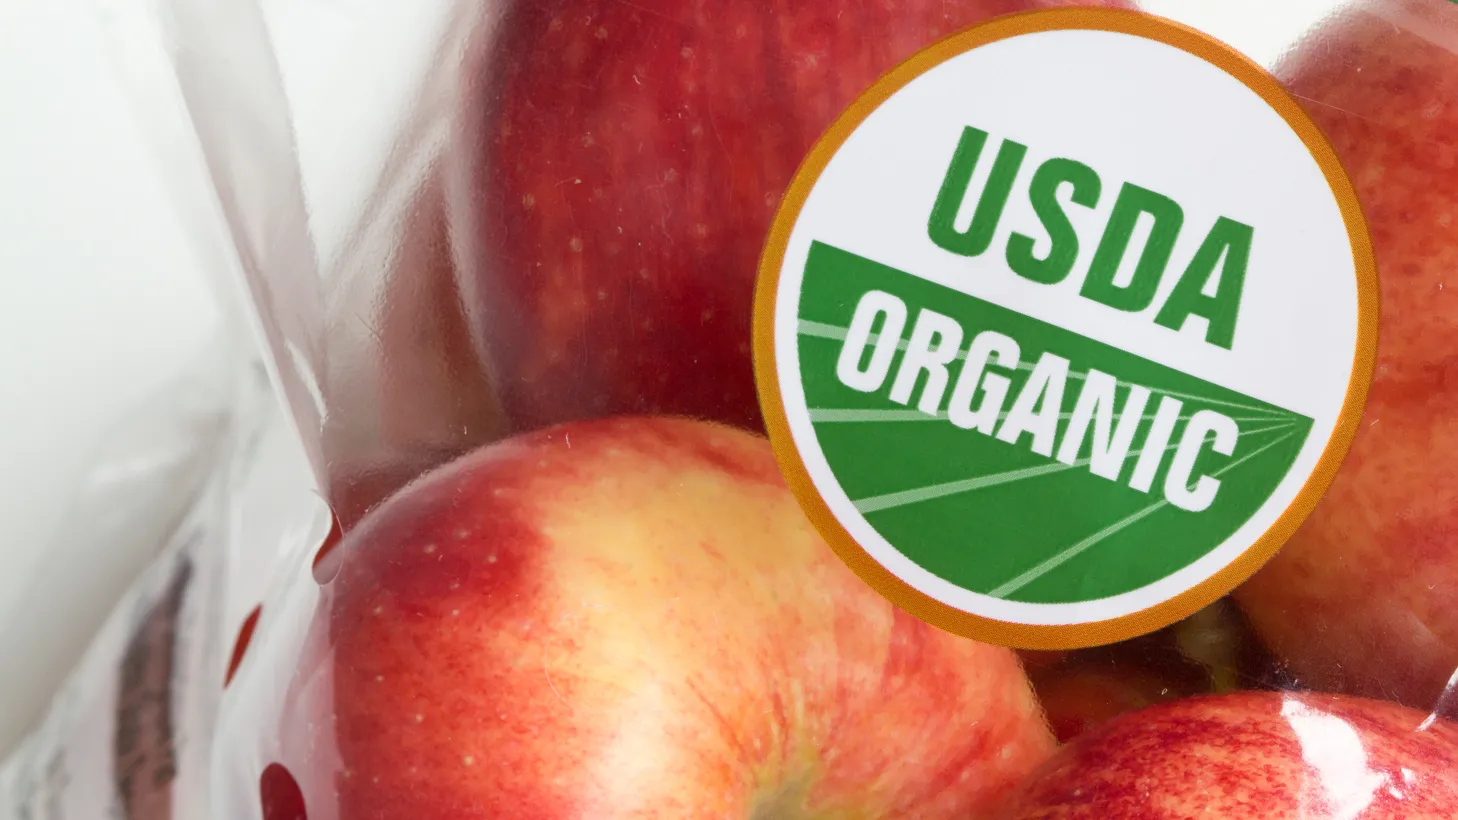 “To call something organic, it really means something, especially in the state of California,” California farmer Steven Murray, Jr. says of the organic label.